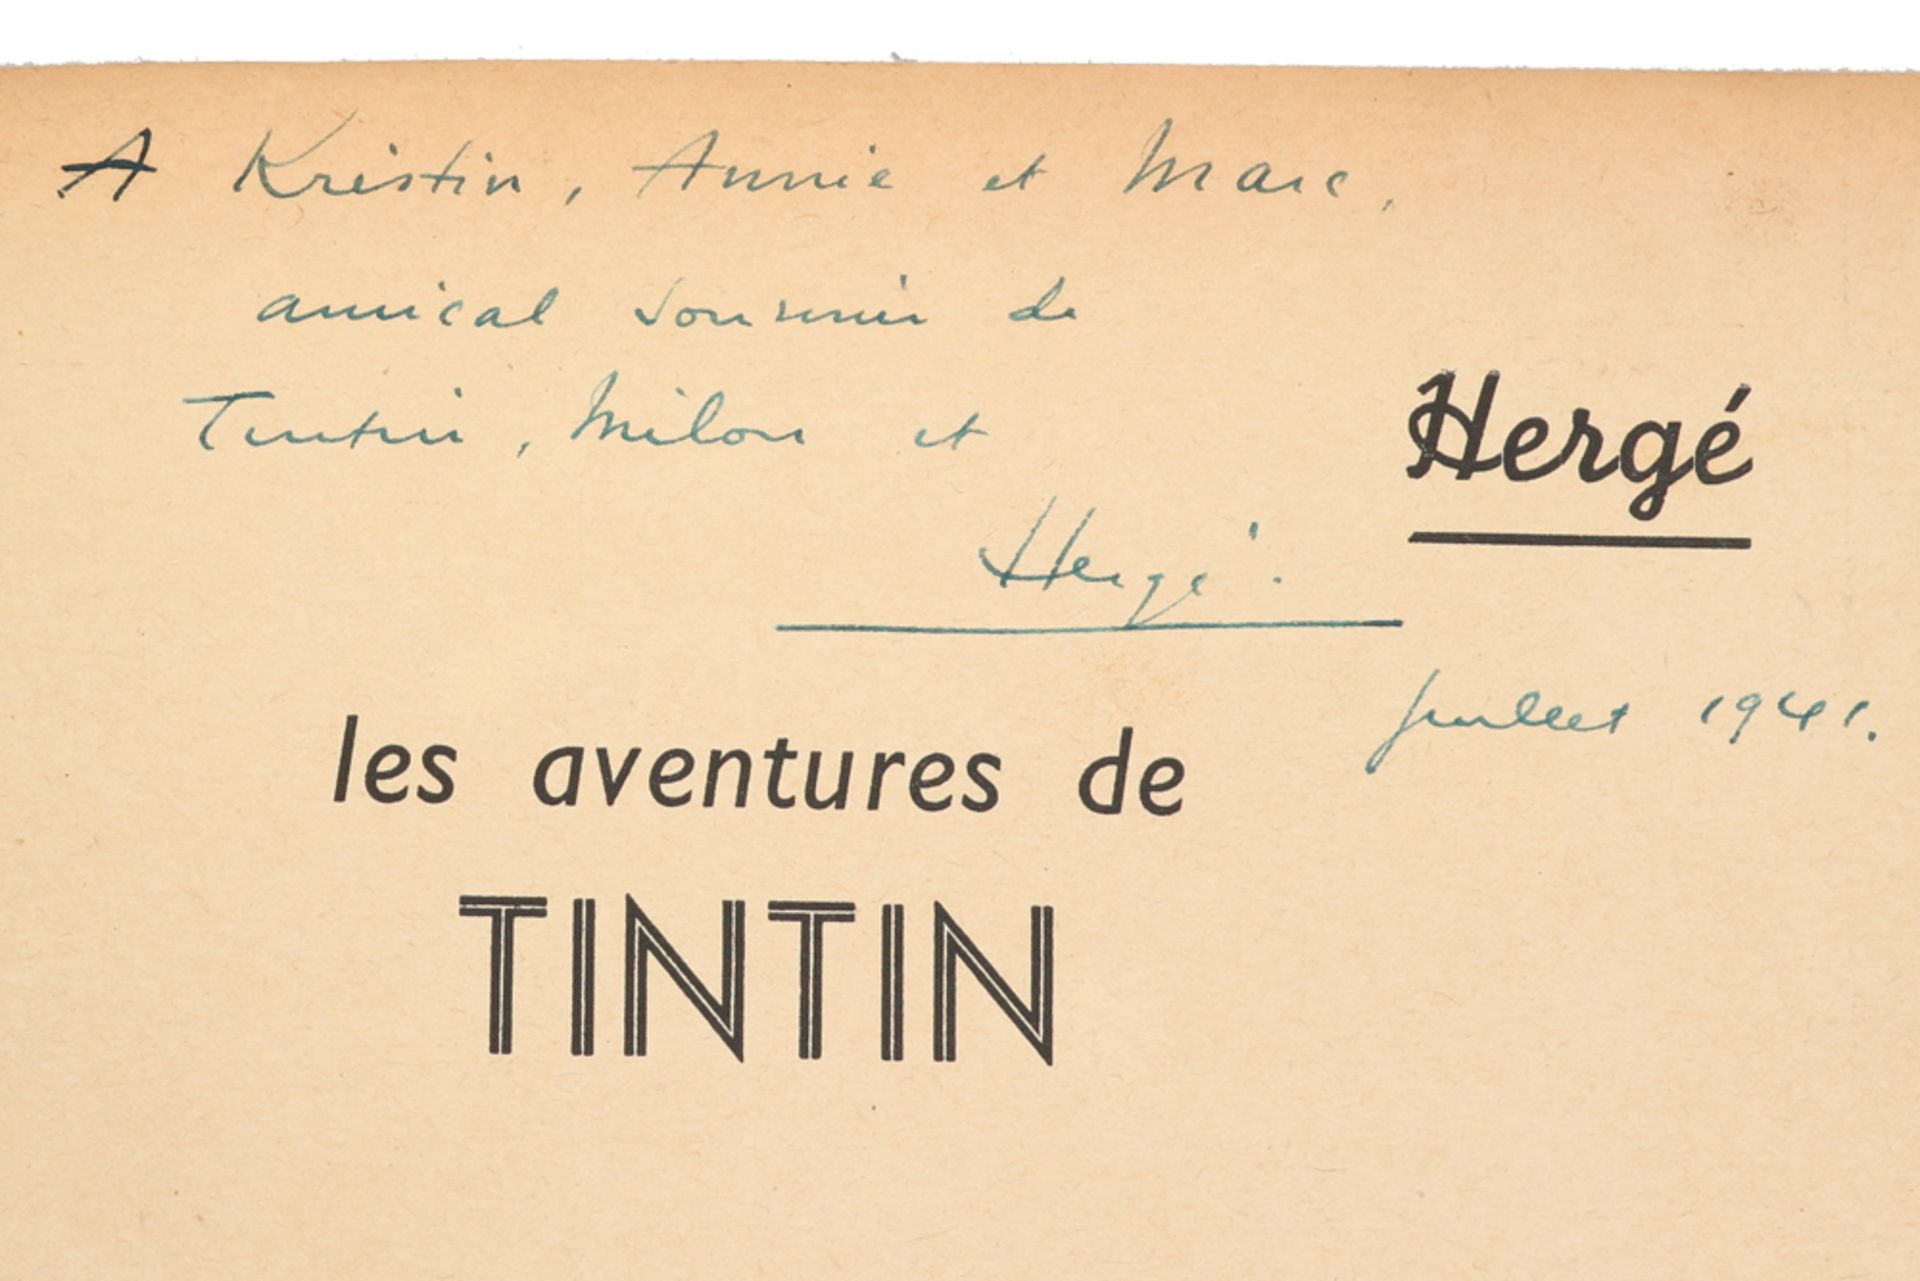 Hergé hand signed and dedicated "Tintin" - album : "Le Lotus bleu" with dedication "A Kristin, Annie - Image 6 of 7